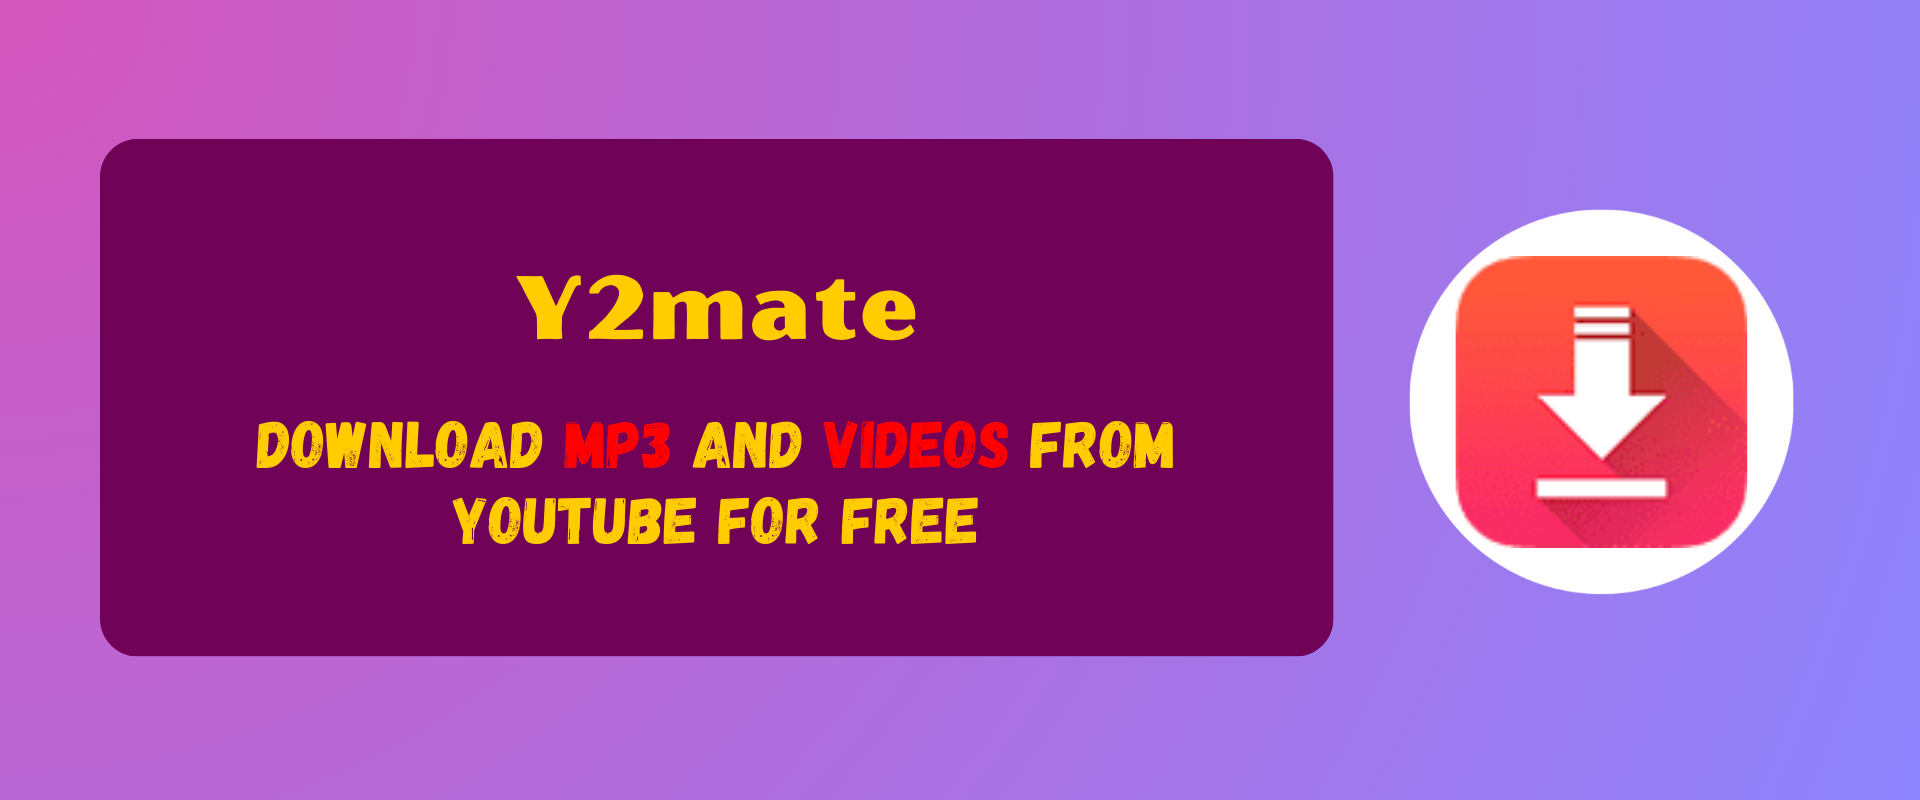 Download mp3s and Videos From YouTube